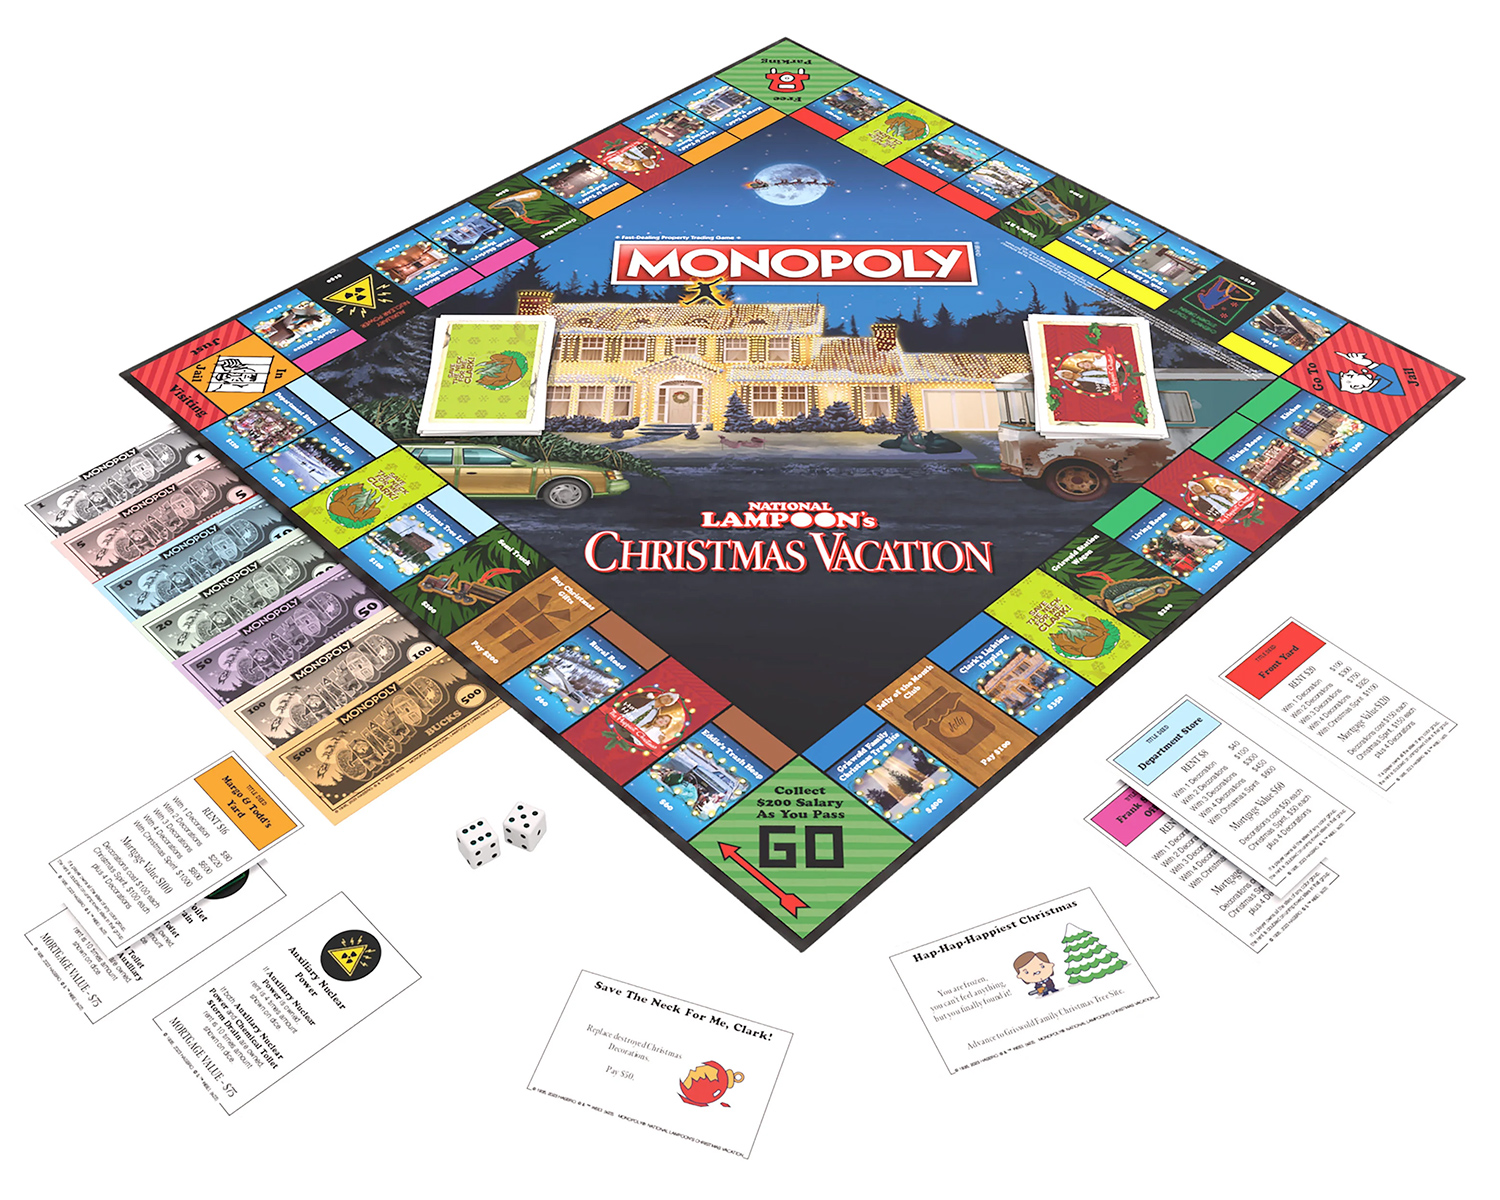 Comedy Monopoly Game Frustrated Holidays at Christmas